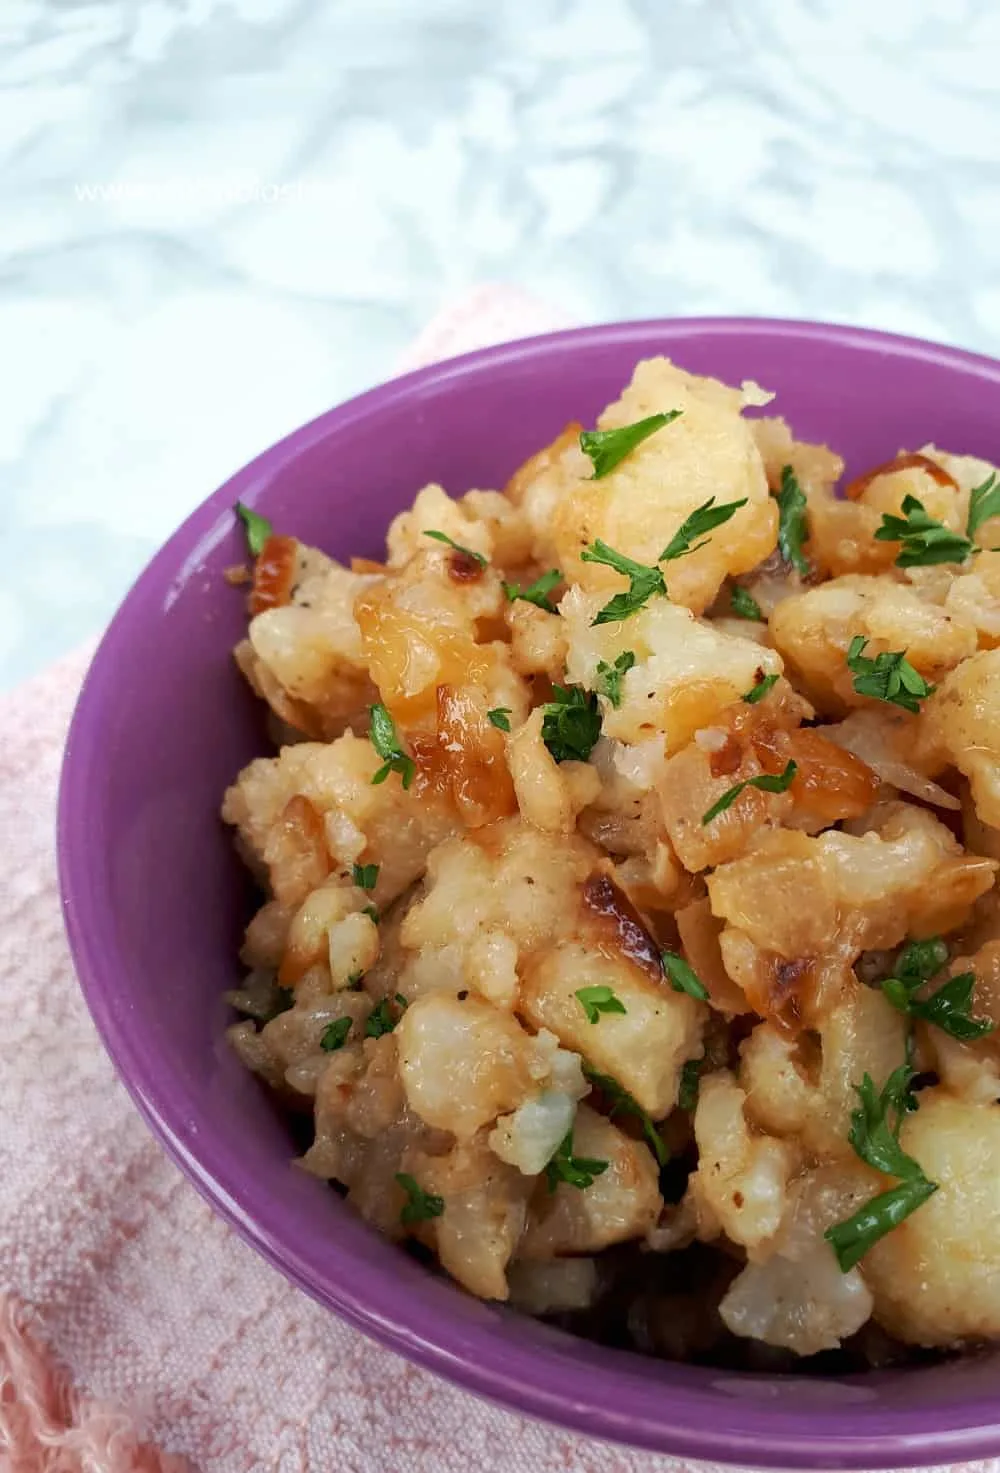 If you are looking for a new Cauliflower side dish, do try this very tasty, quick and easy recipe for Stir-Fried Cauliflower - simply the best !